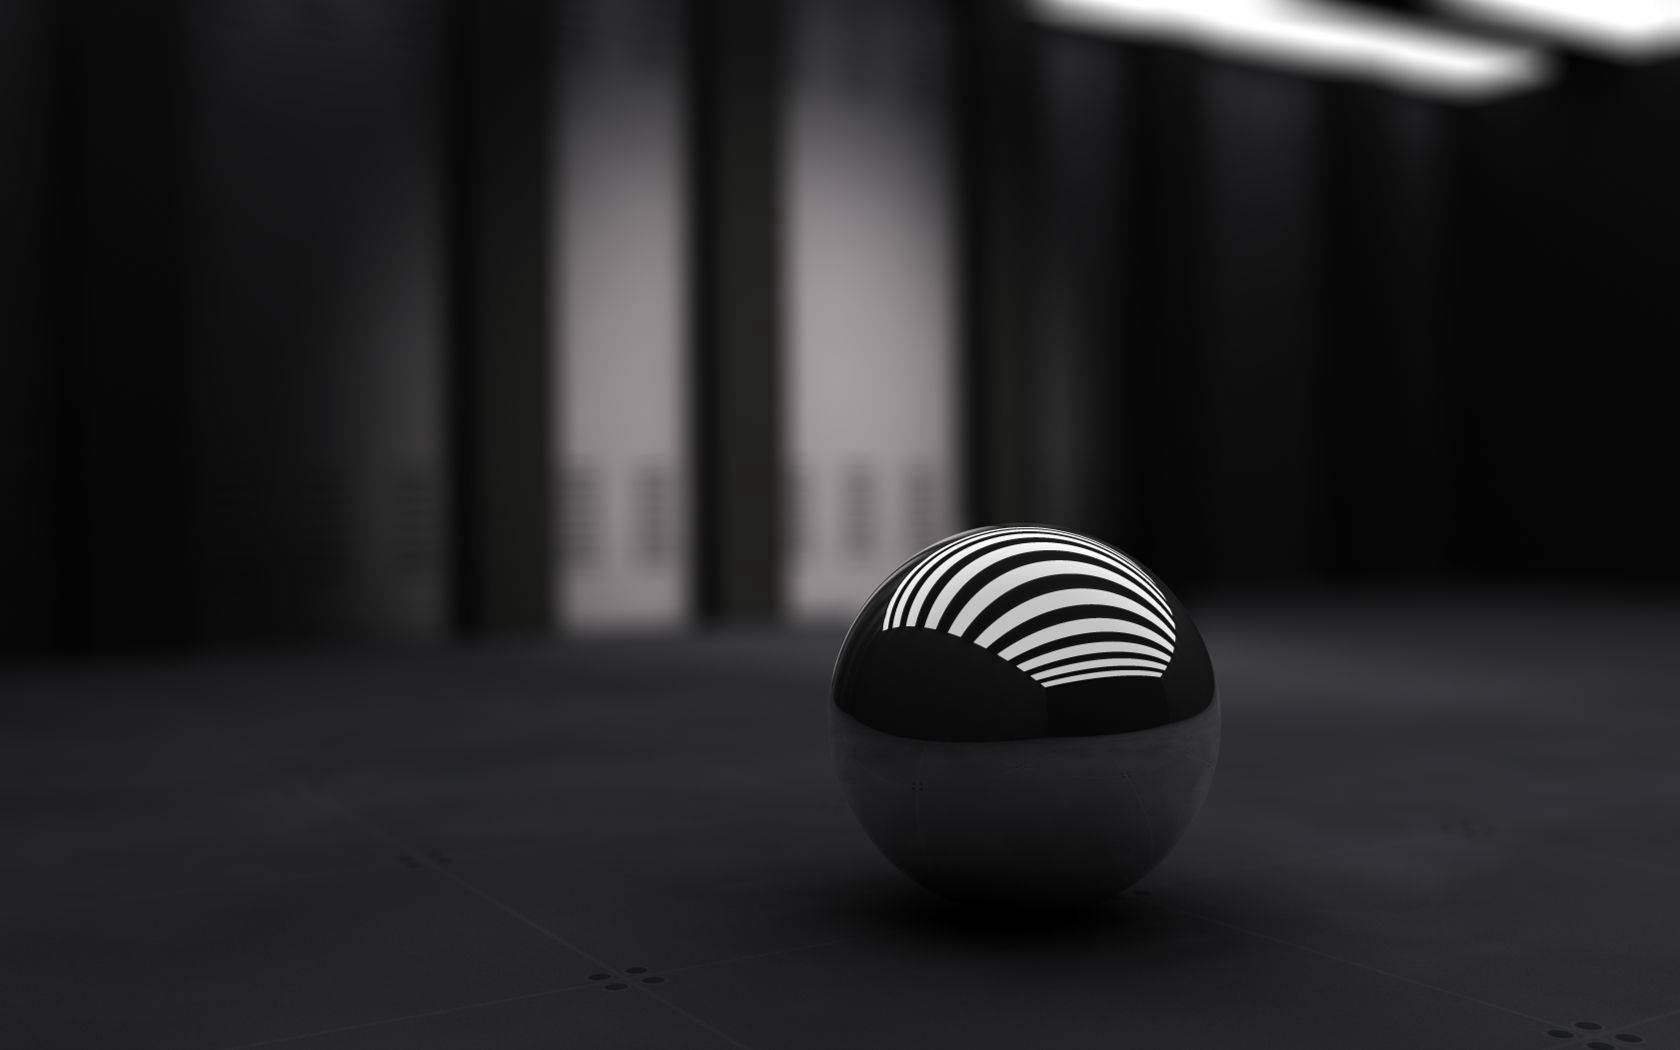 This 3D black and white sphere looks like a 3D representation of a dream catcher. Wallpaper